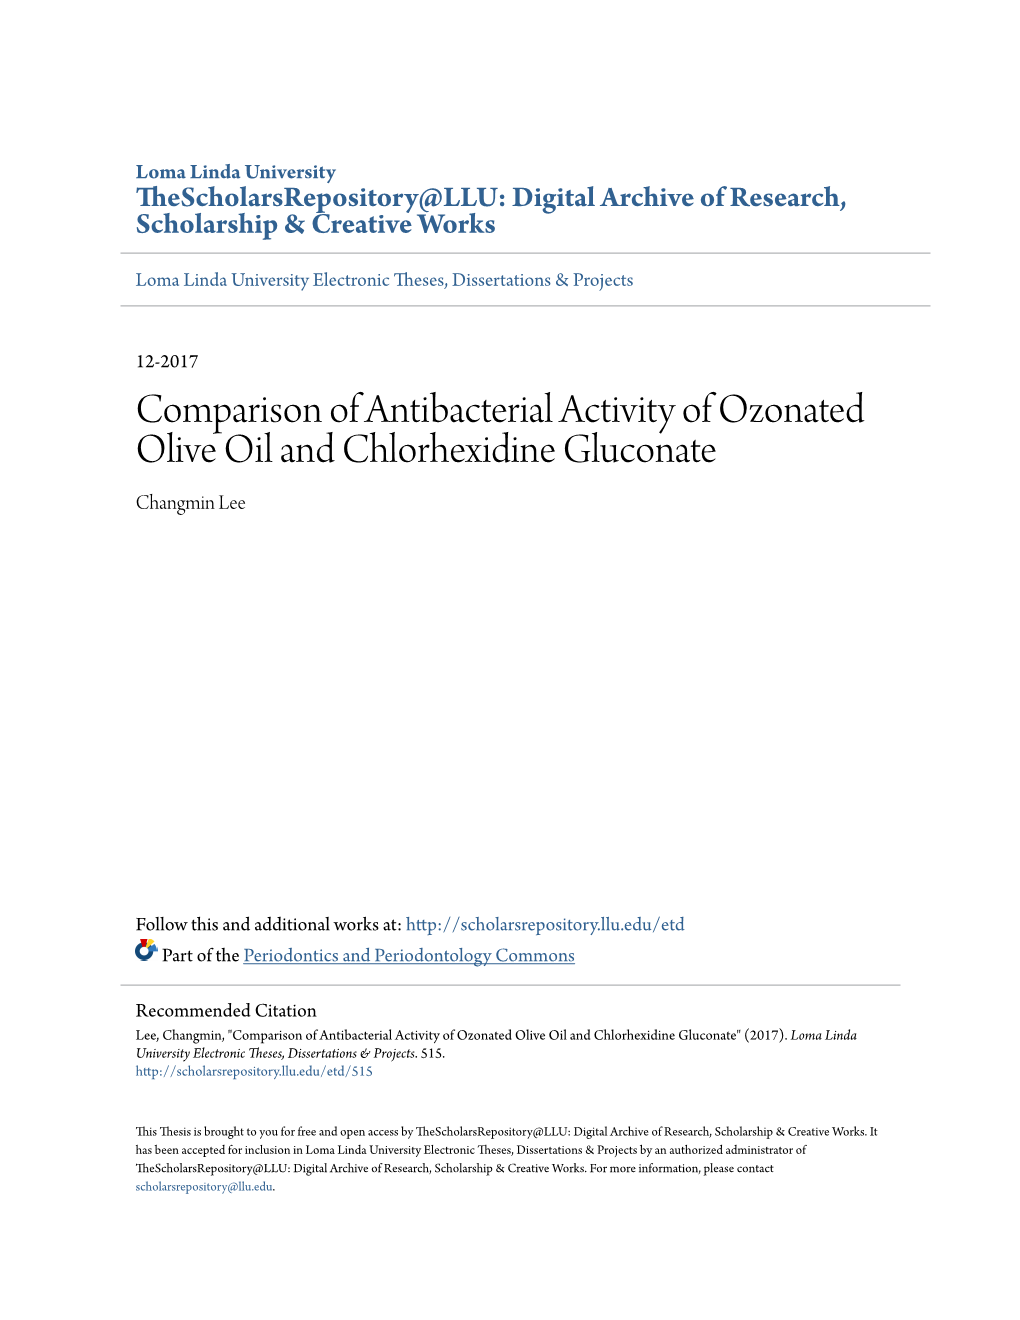 Comparison of Antibacterial Activity of Ozonated Olive Oil and Chlorhexidine Gluconate Changmin Lee